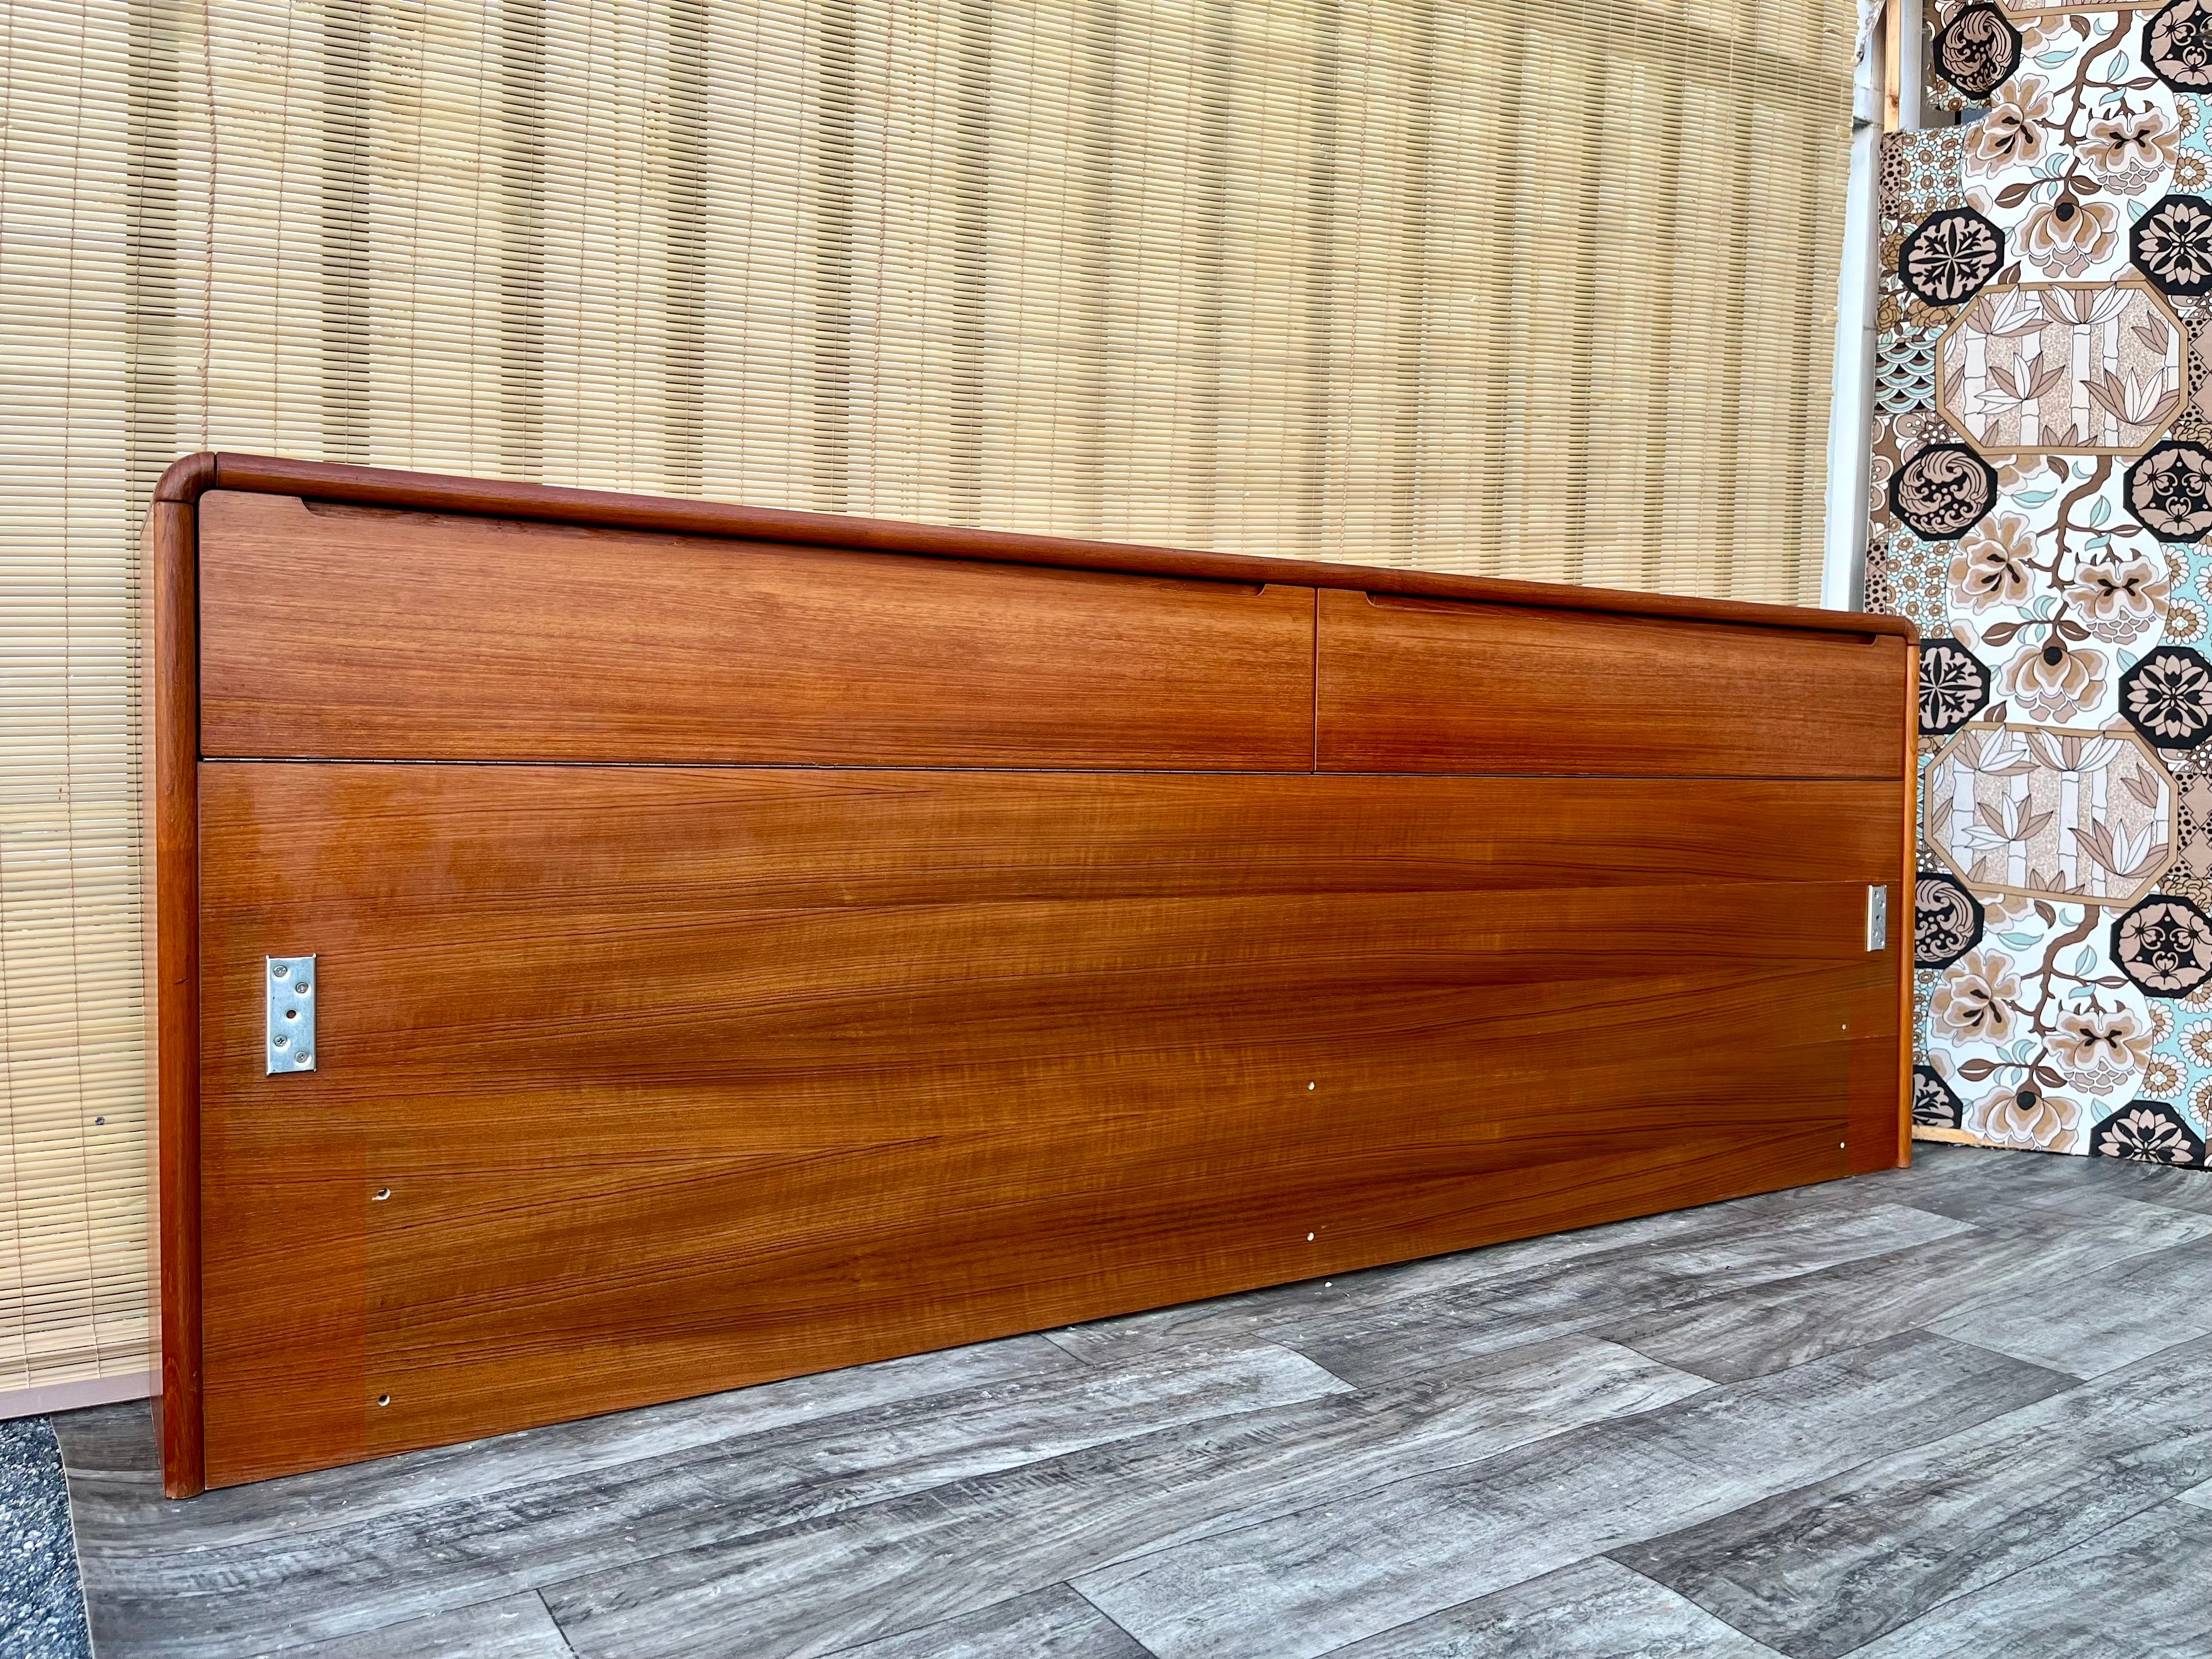 Vintage Danish Mid Century Modern Style Teak King Headboard With Storage by Sun Cabinet. Circa 1980s. 
 Features a sleek Scandinavian Modern Design with two concealed storage compartments with stylish recessed pulls , gorgeous curved-edge design